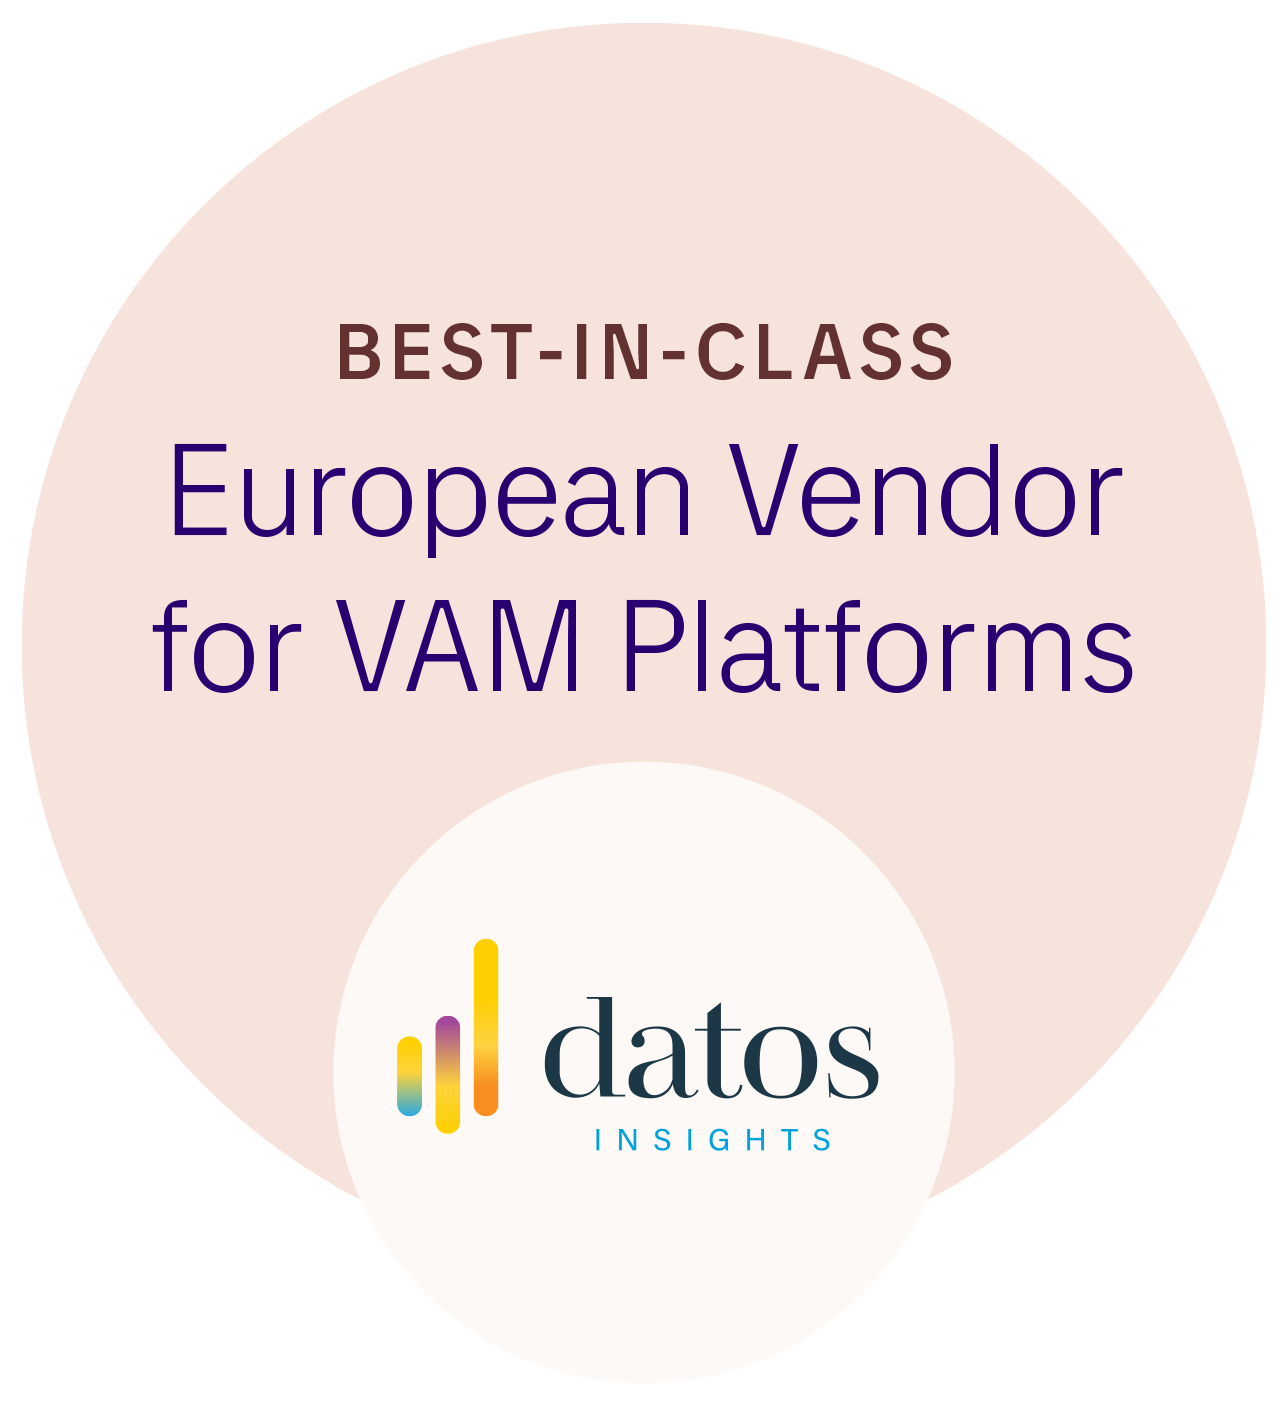 Tietoevry Banking recognized as best-in-class European vendor for Virtual Account Management (VAM) platforms